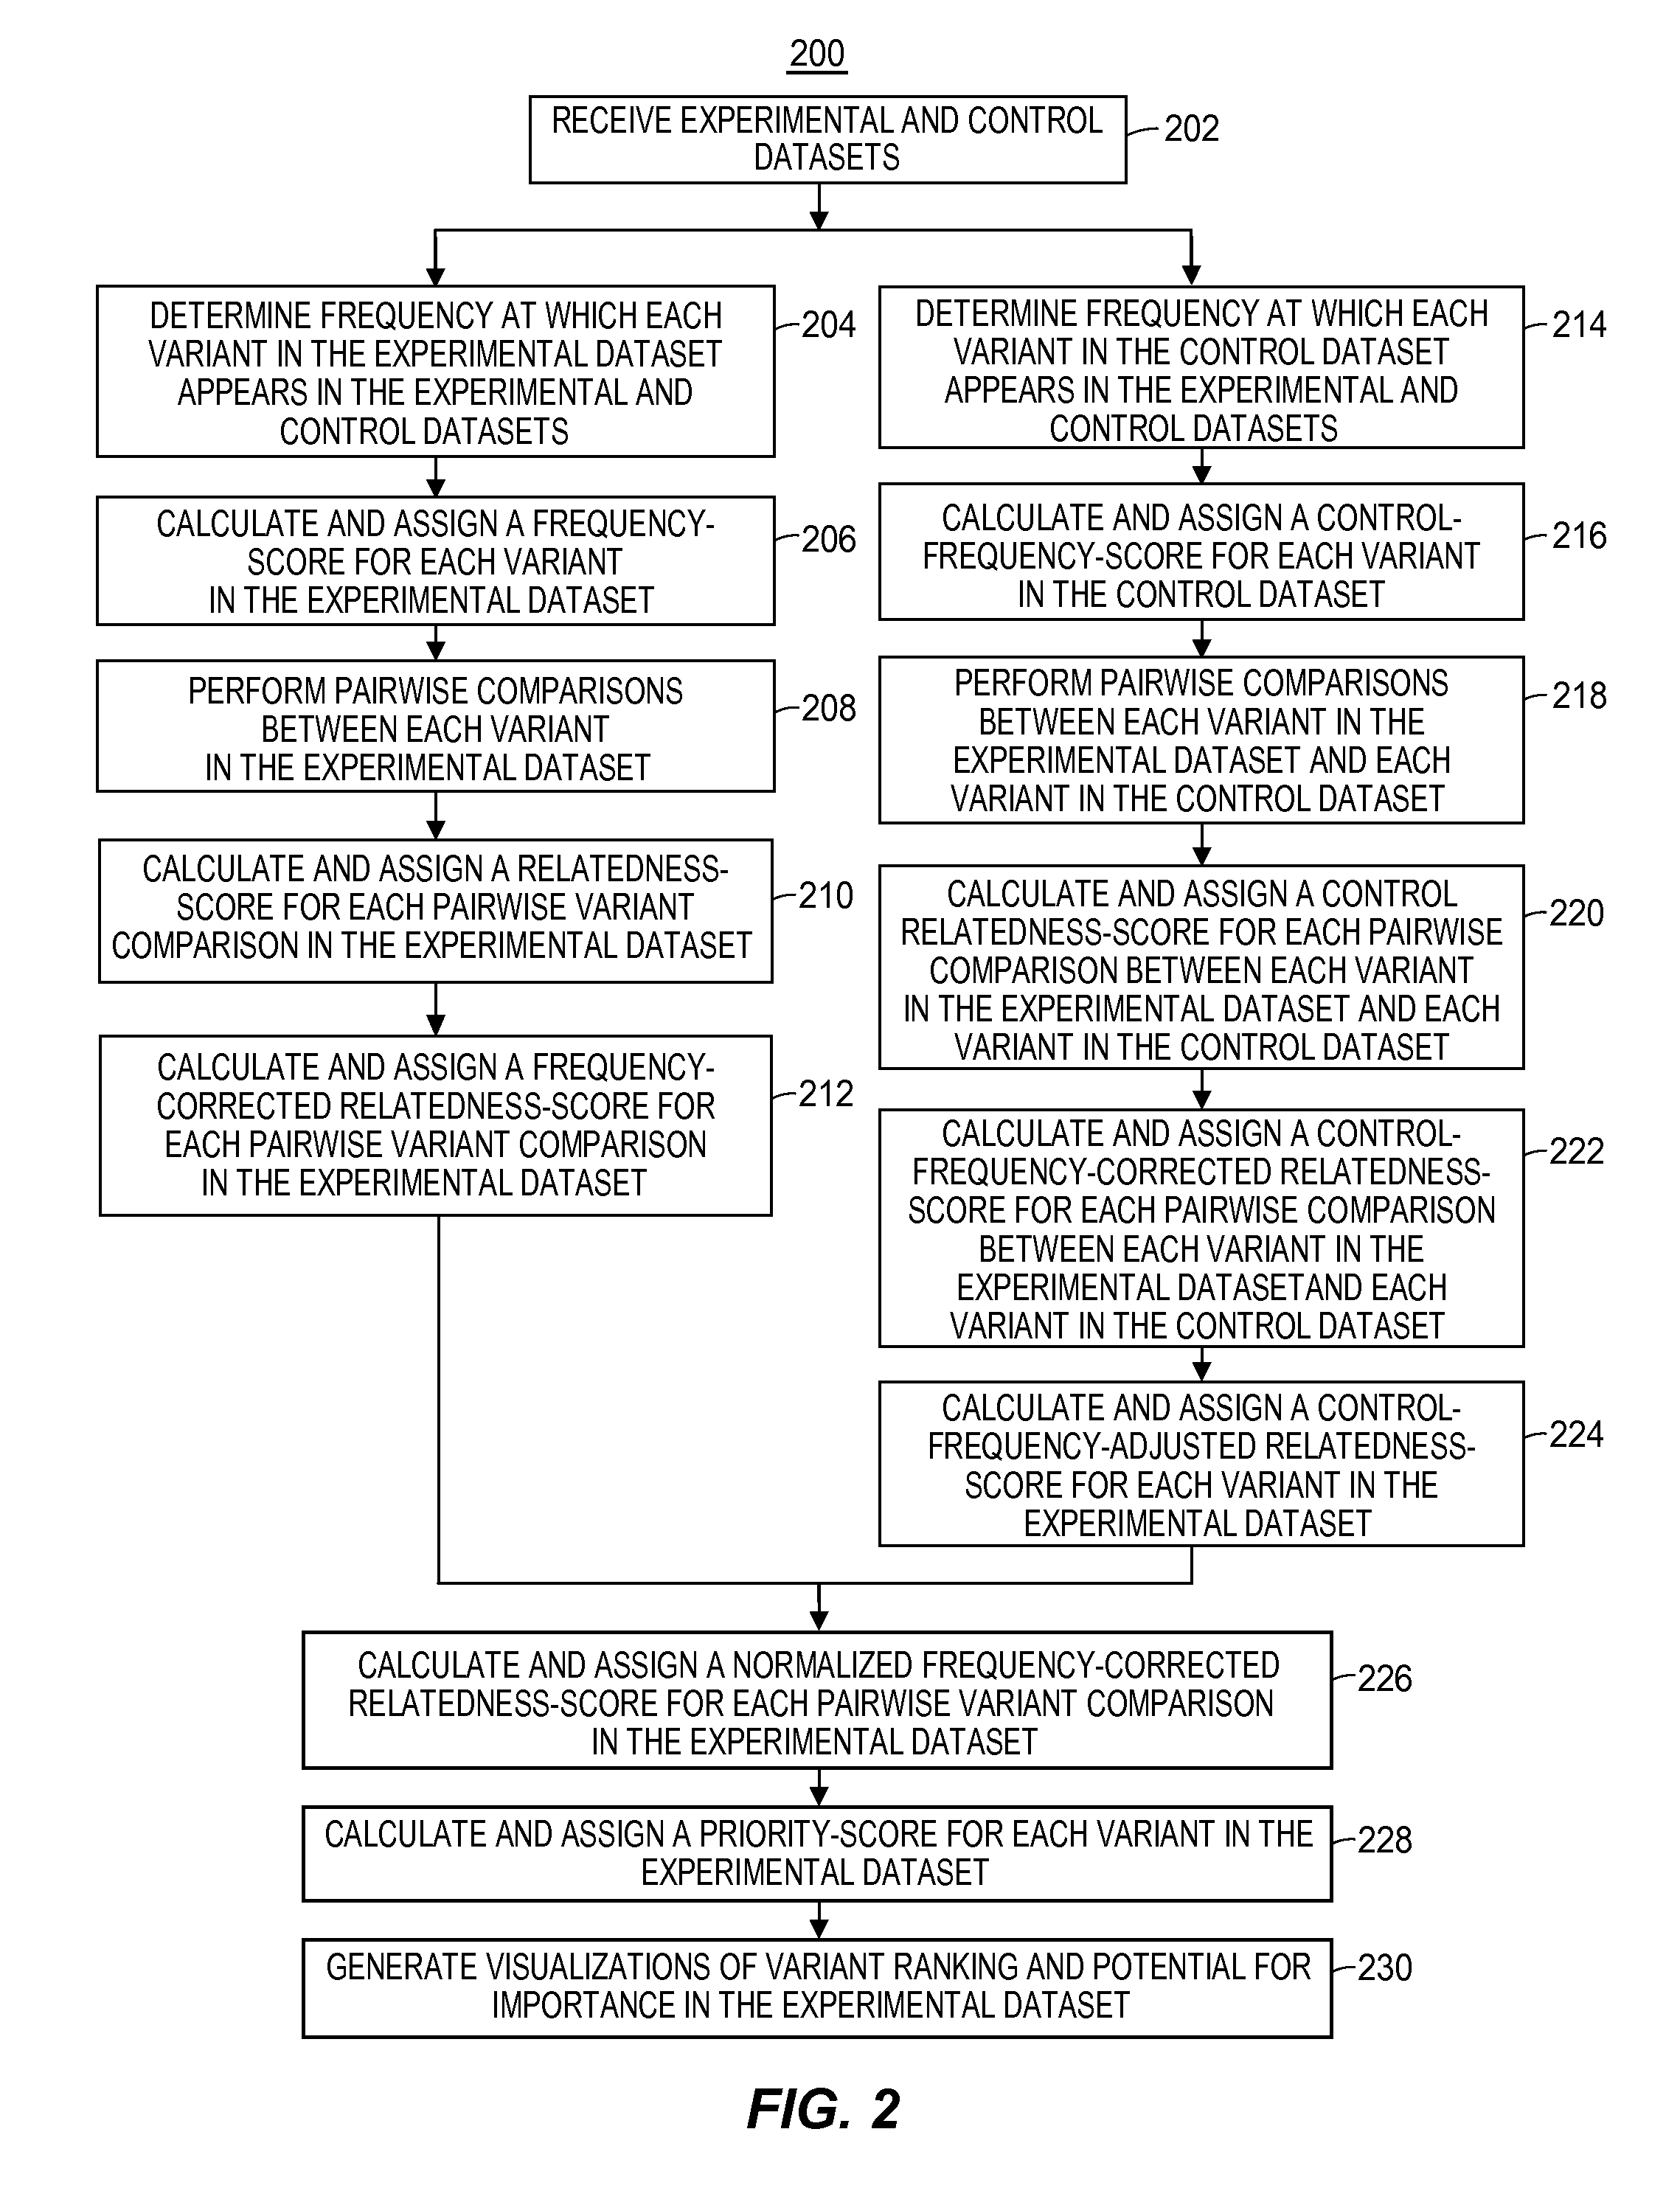 Systems and methods for genomic variant analysis